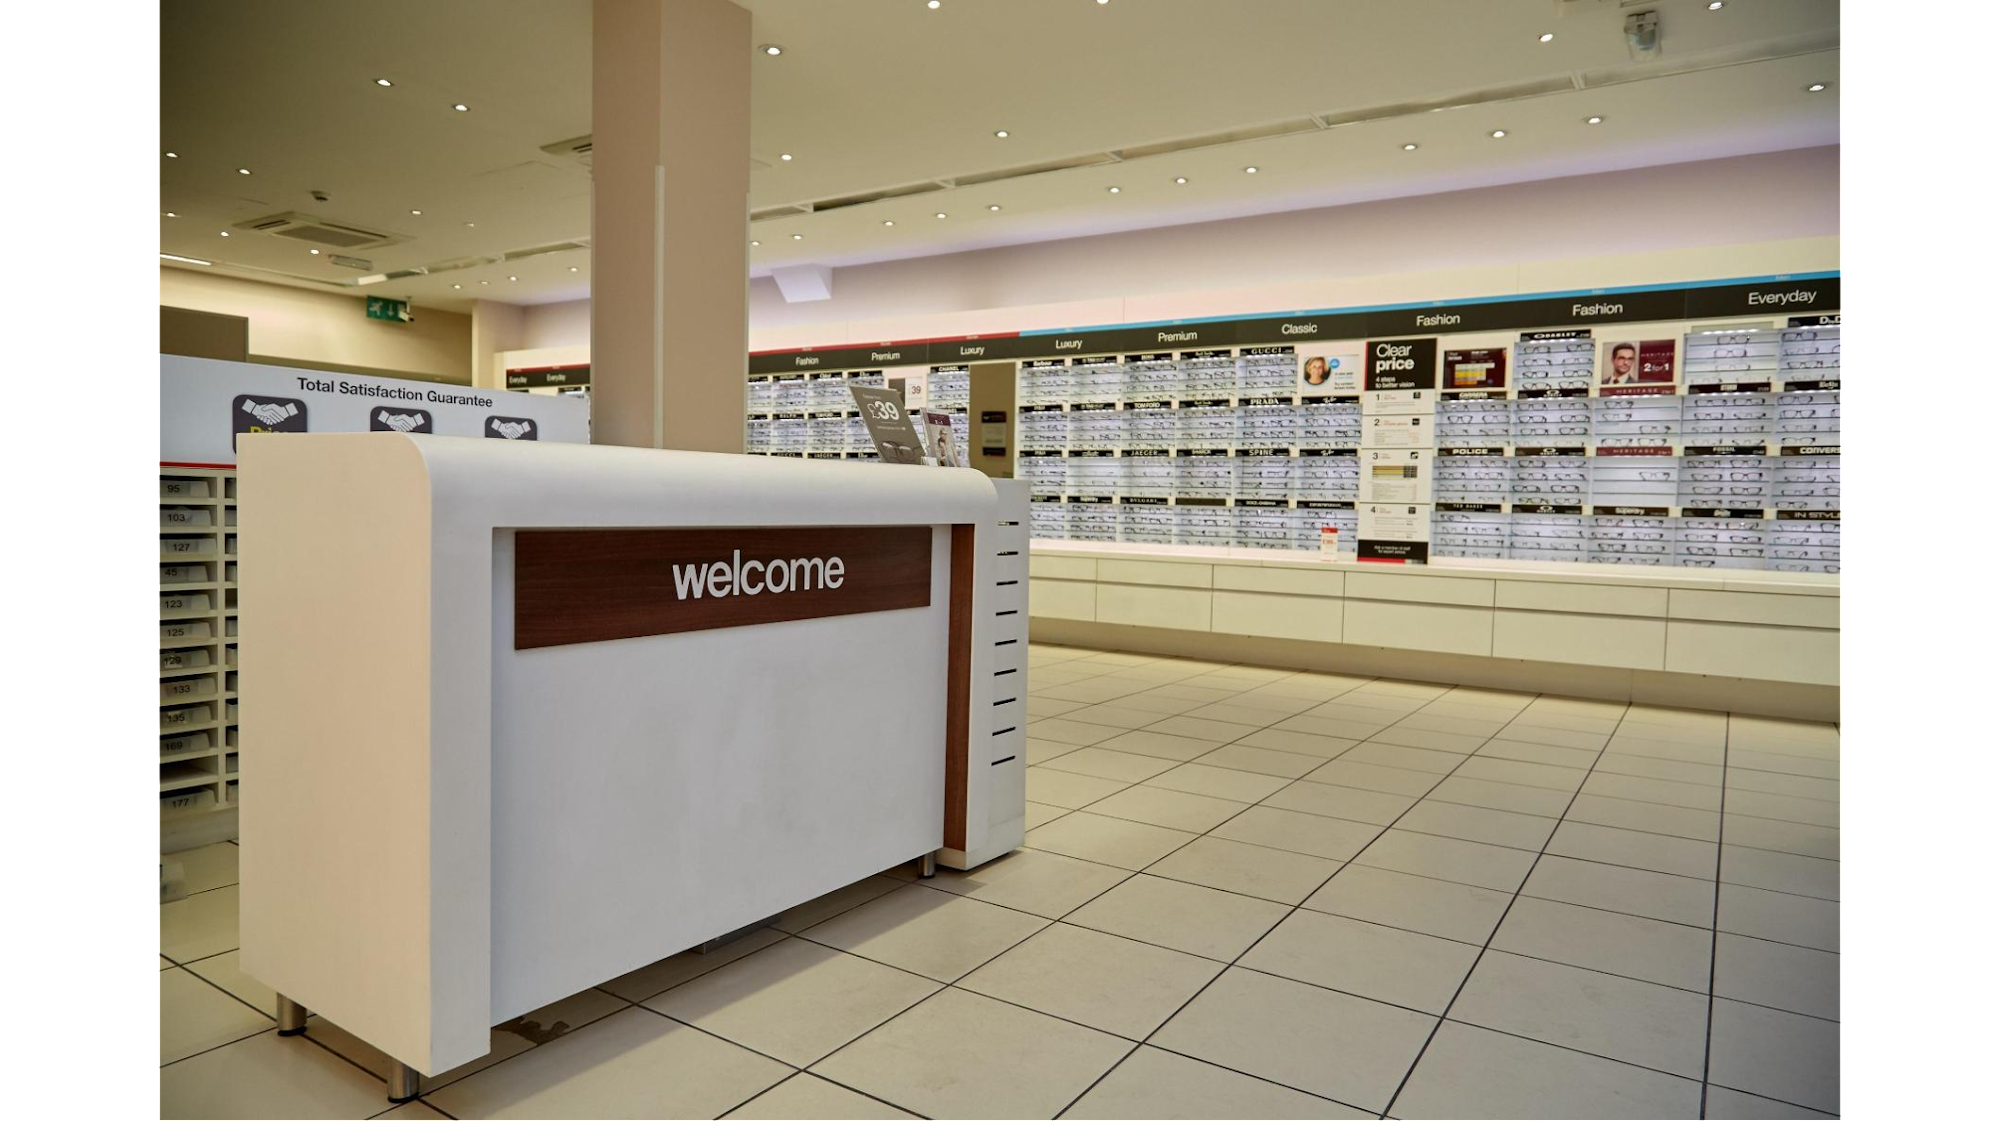 Vision Express Opticians - Rugby - Clock Towers Shopping Centre